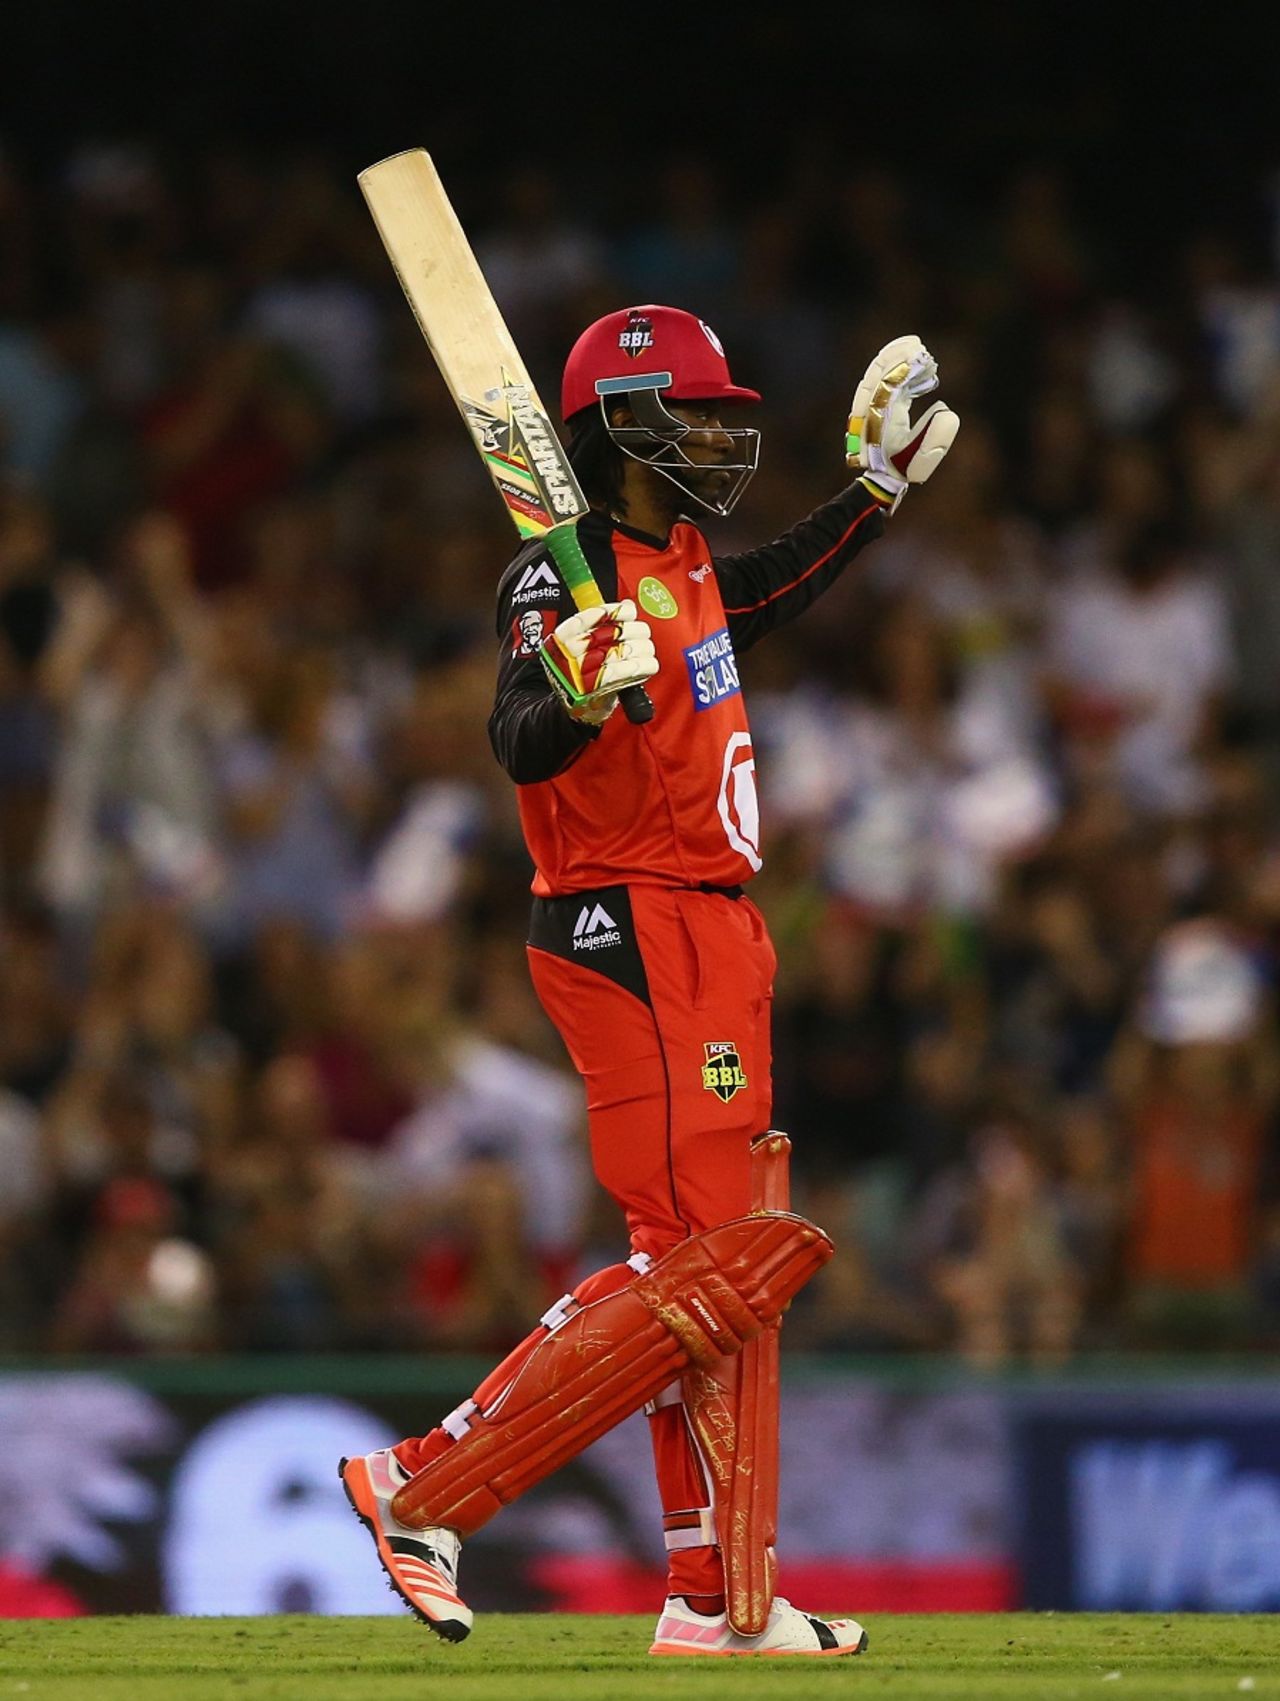 Chris Gayle celebrates his 12-ball fifty, Melbourne Renegades v Adelaide Strikers, BBL 2015-16, Melbourne, January 18, 2016